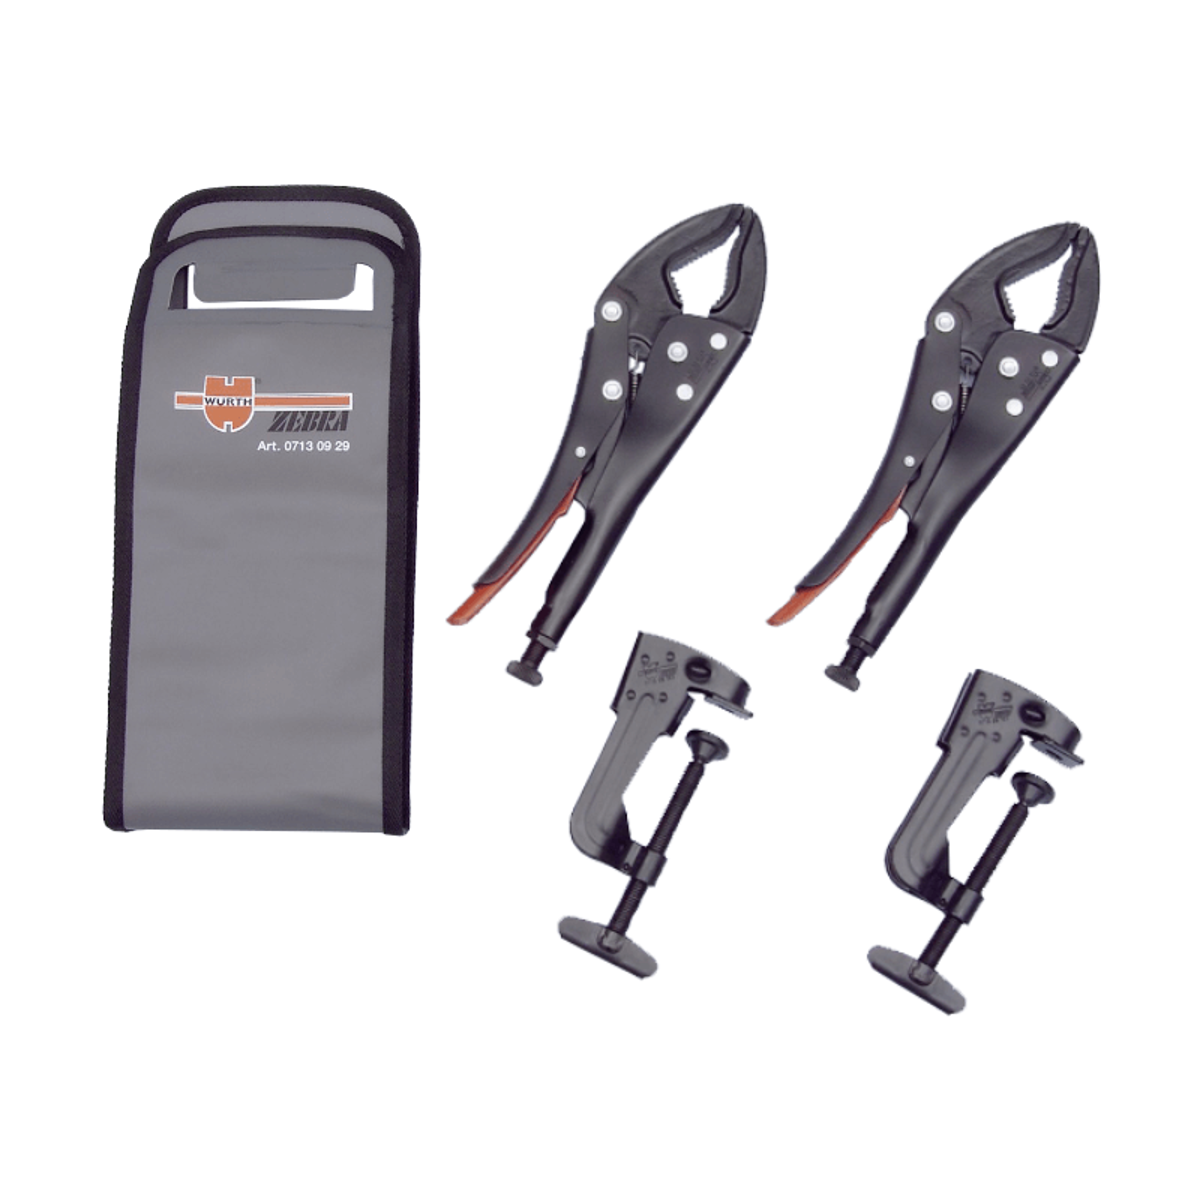 Mobile Vice Locking Pliers Set with Table Clamp